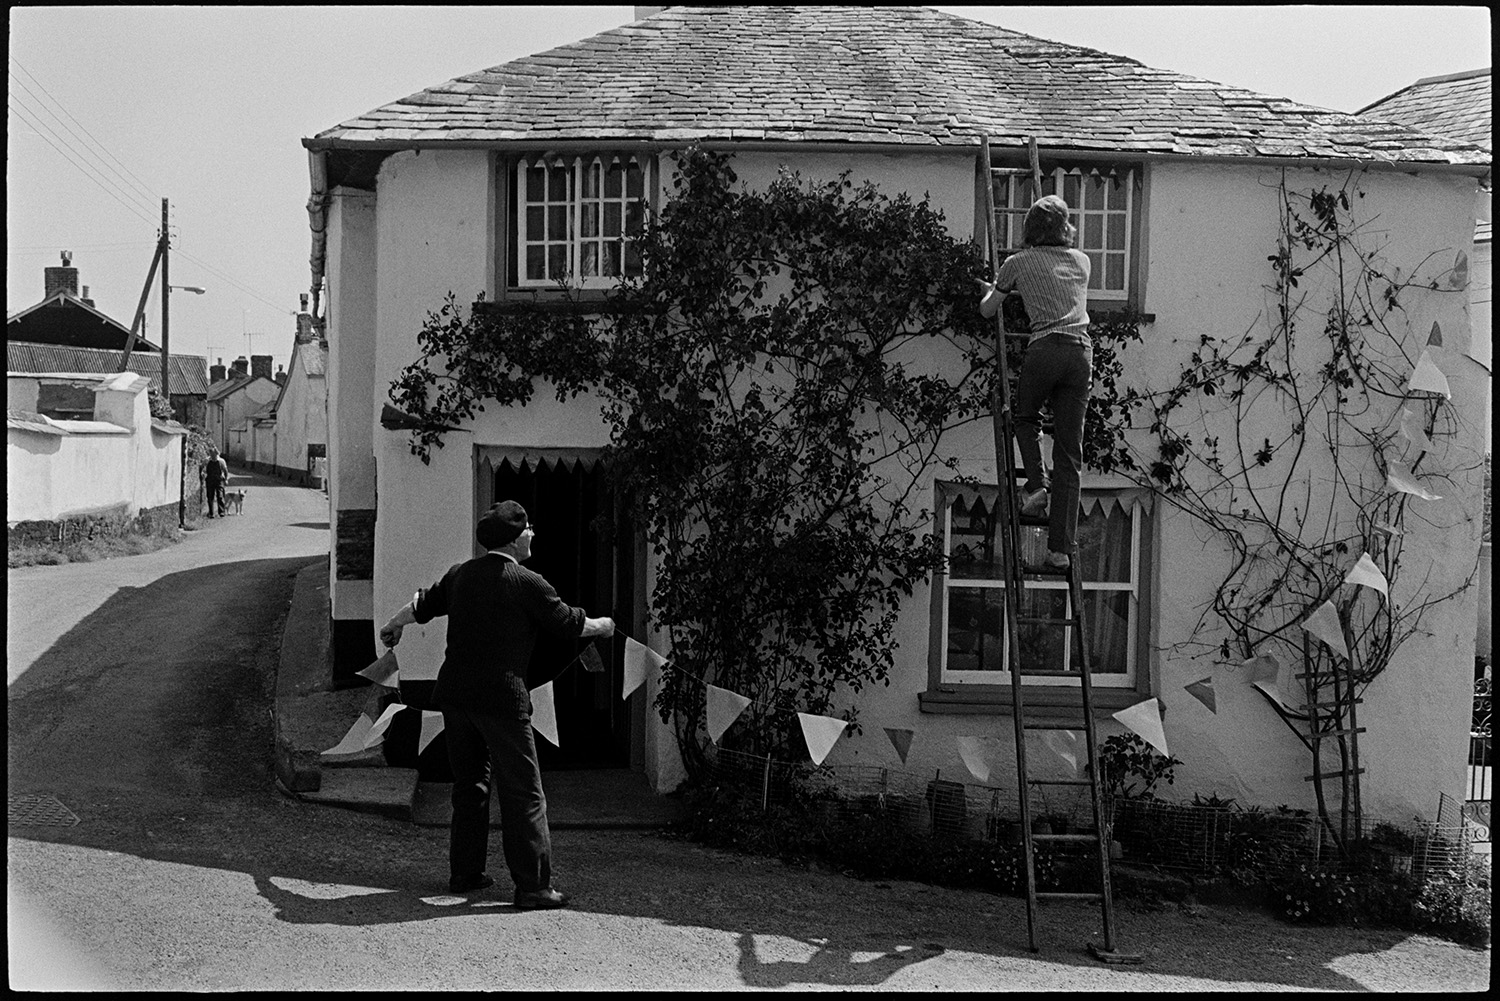 Men putting flags on cottage for Jubilee. 
[Jack Marden, wearing a beret, and another man up a ladder, attaching bunting to Rose Cottage, Aller Road, Dolton for Queen Elizabeth II Silver Jubilee. A rose is growing up the cottage wall.]